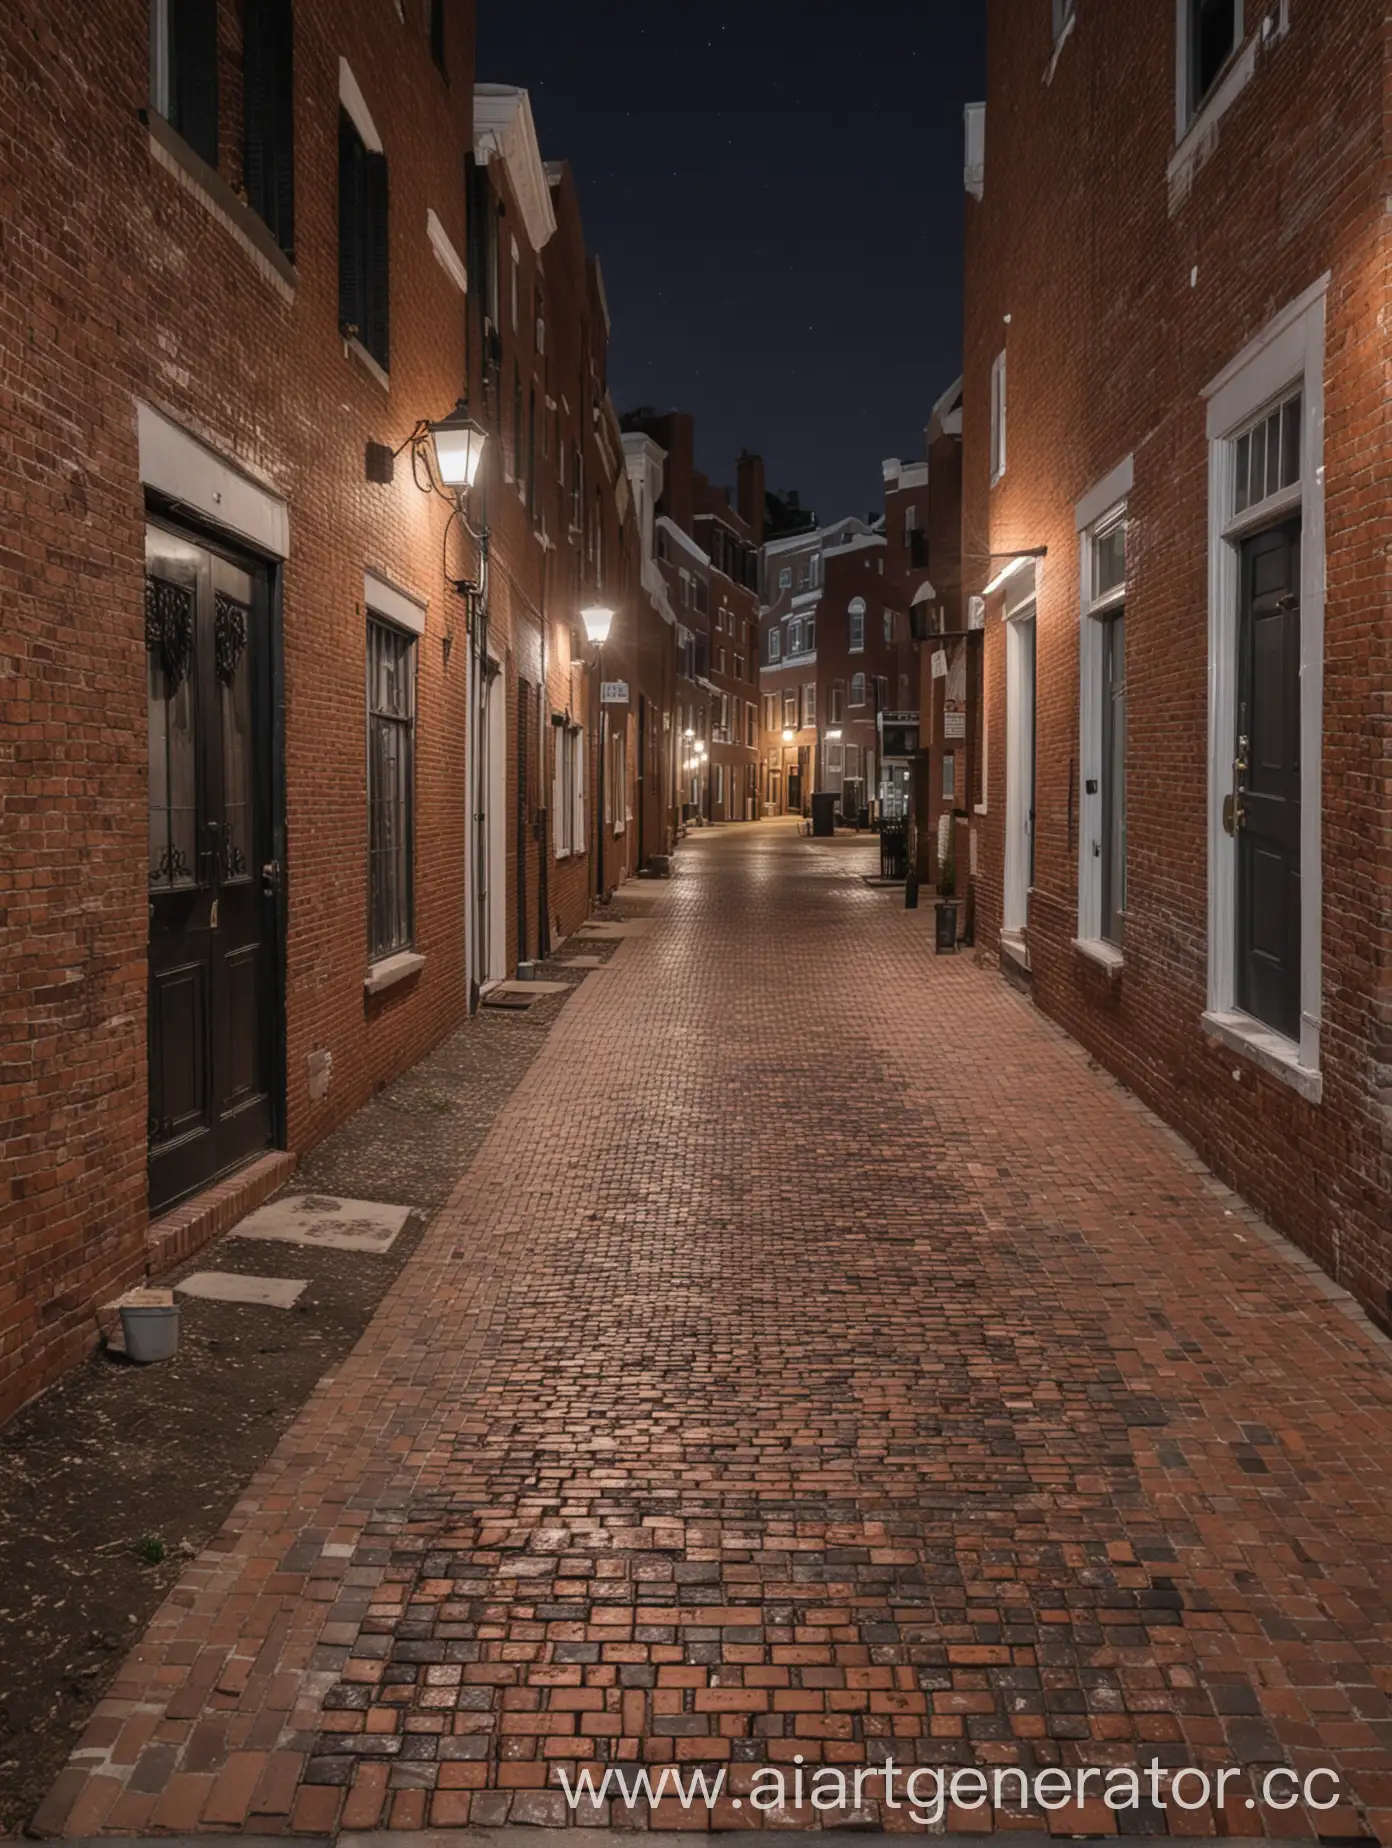 buildings on both sides, night the lights are on, smooth brick walkway